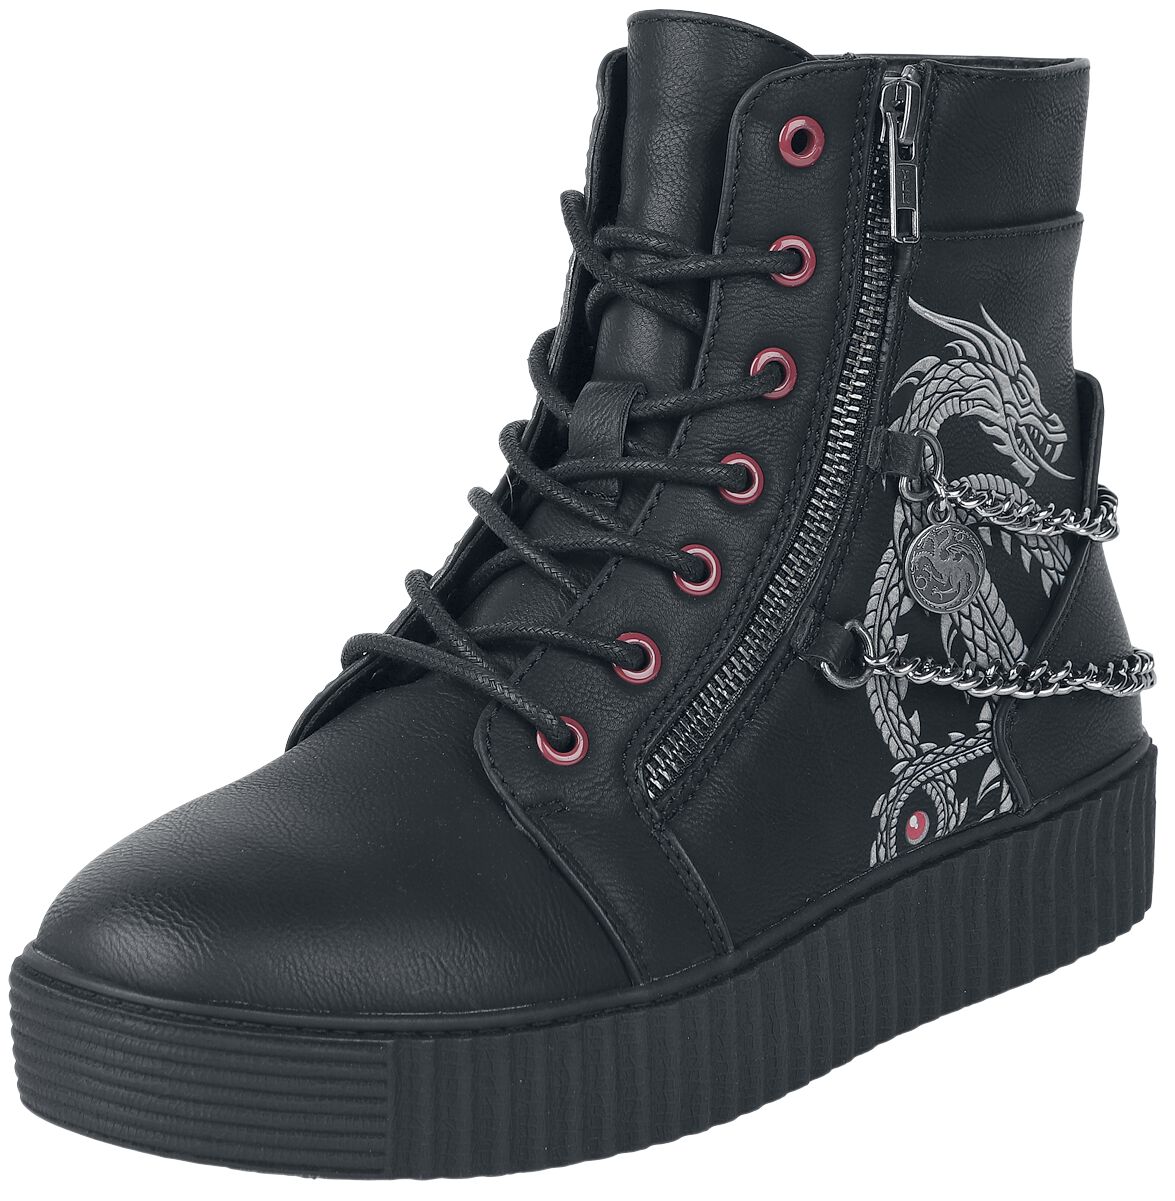 Game of Thrones Dragons Sneakers High black